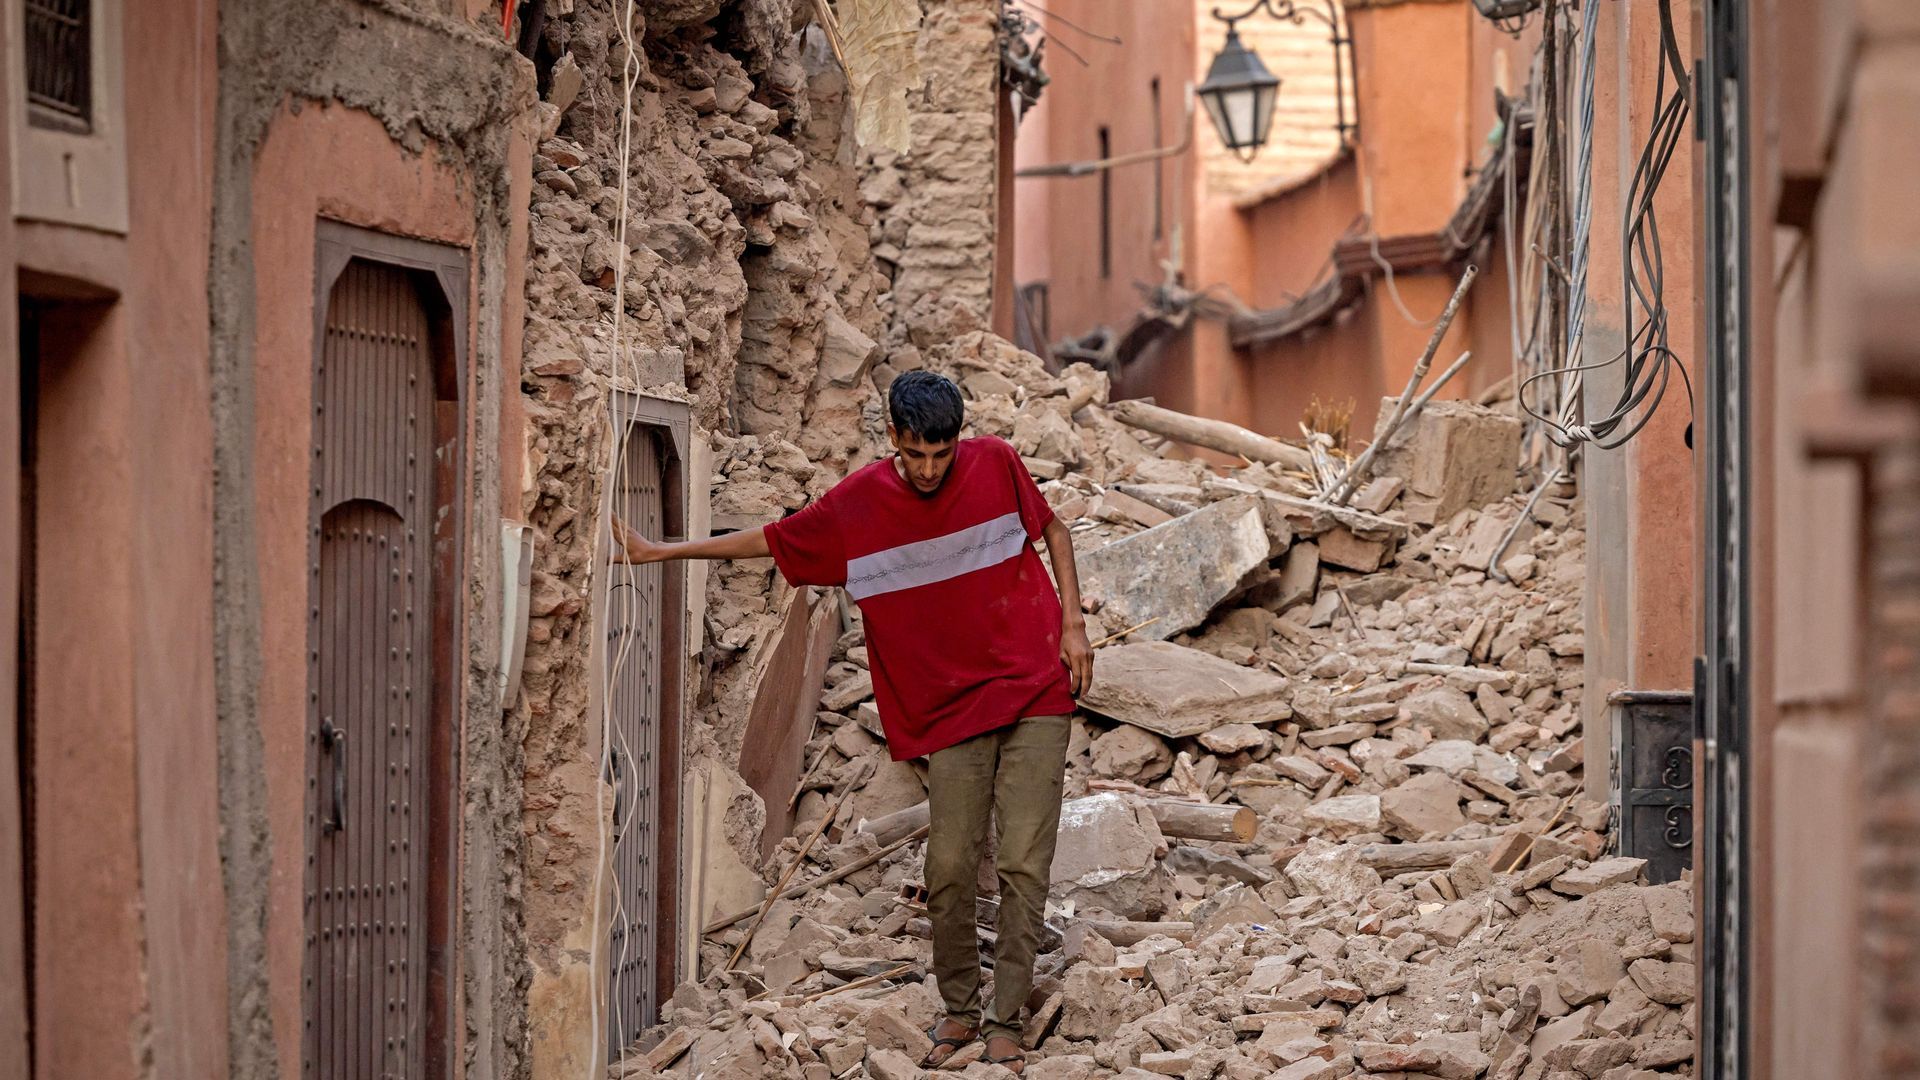 A resident navigates through the rubble in Morocco's Marrakesh following a powerful quake. Photo: Fadel Senna/AFP via Getty Images